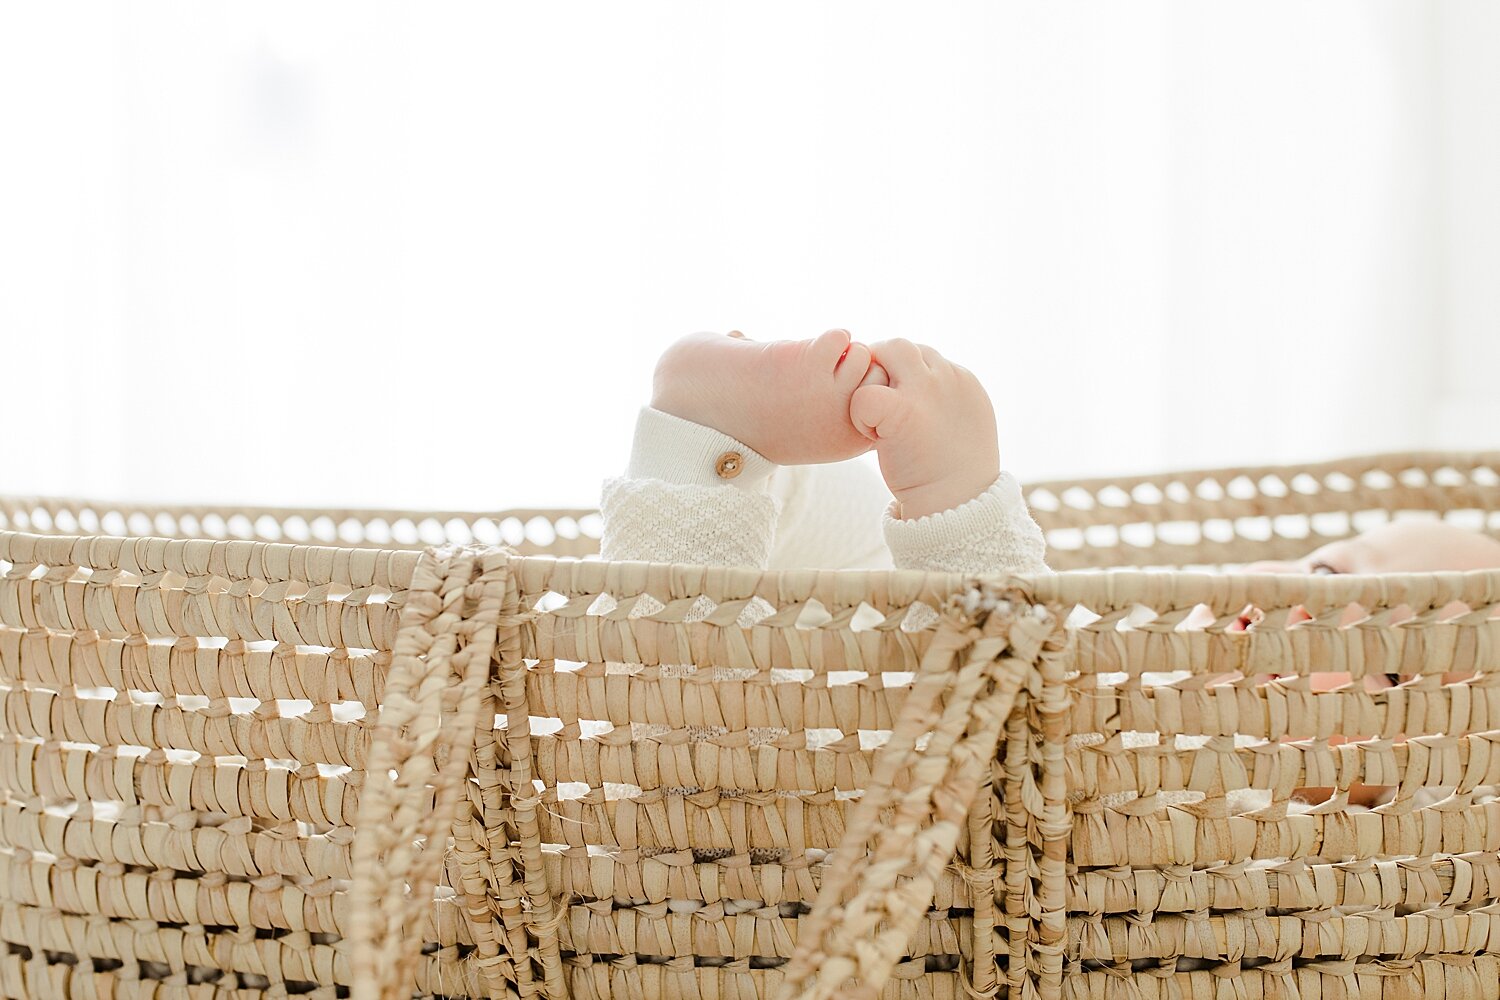 6 month old baby in Moses basket for photoshoot. Photos by Kristin Wood Photography.